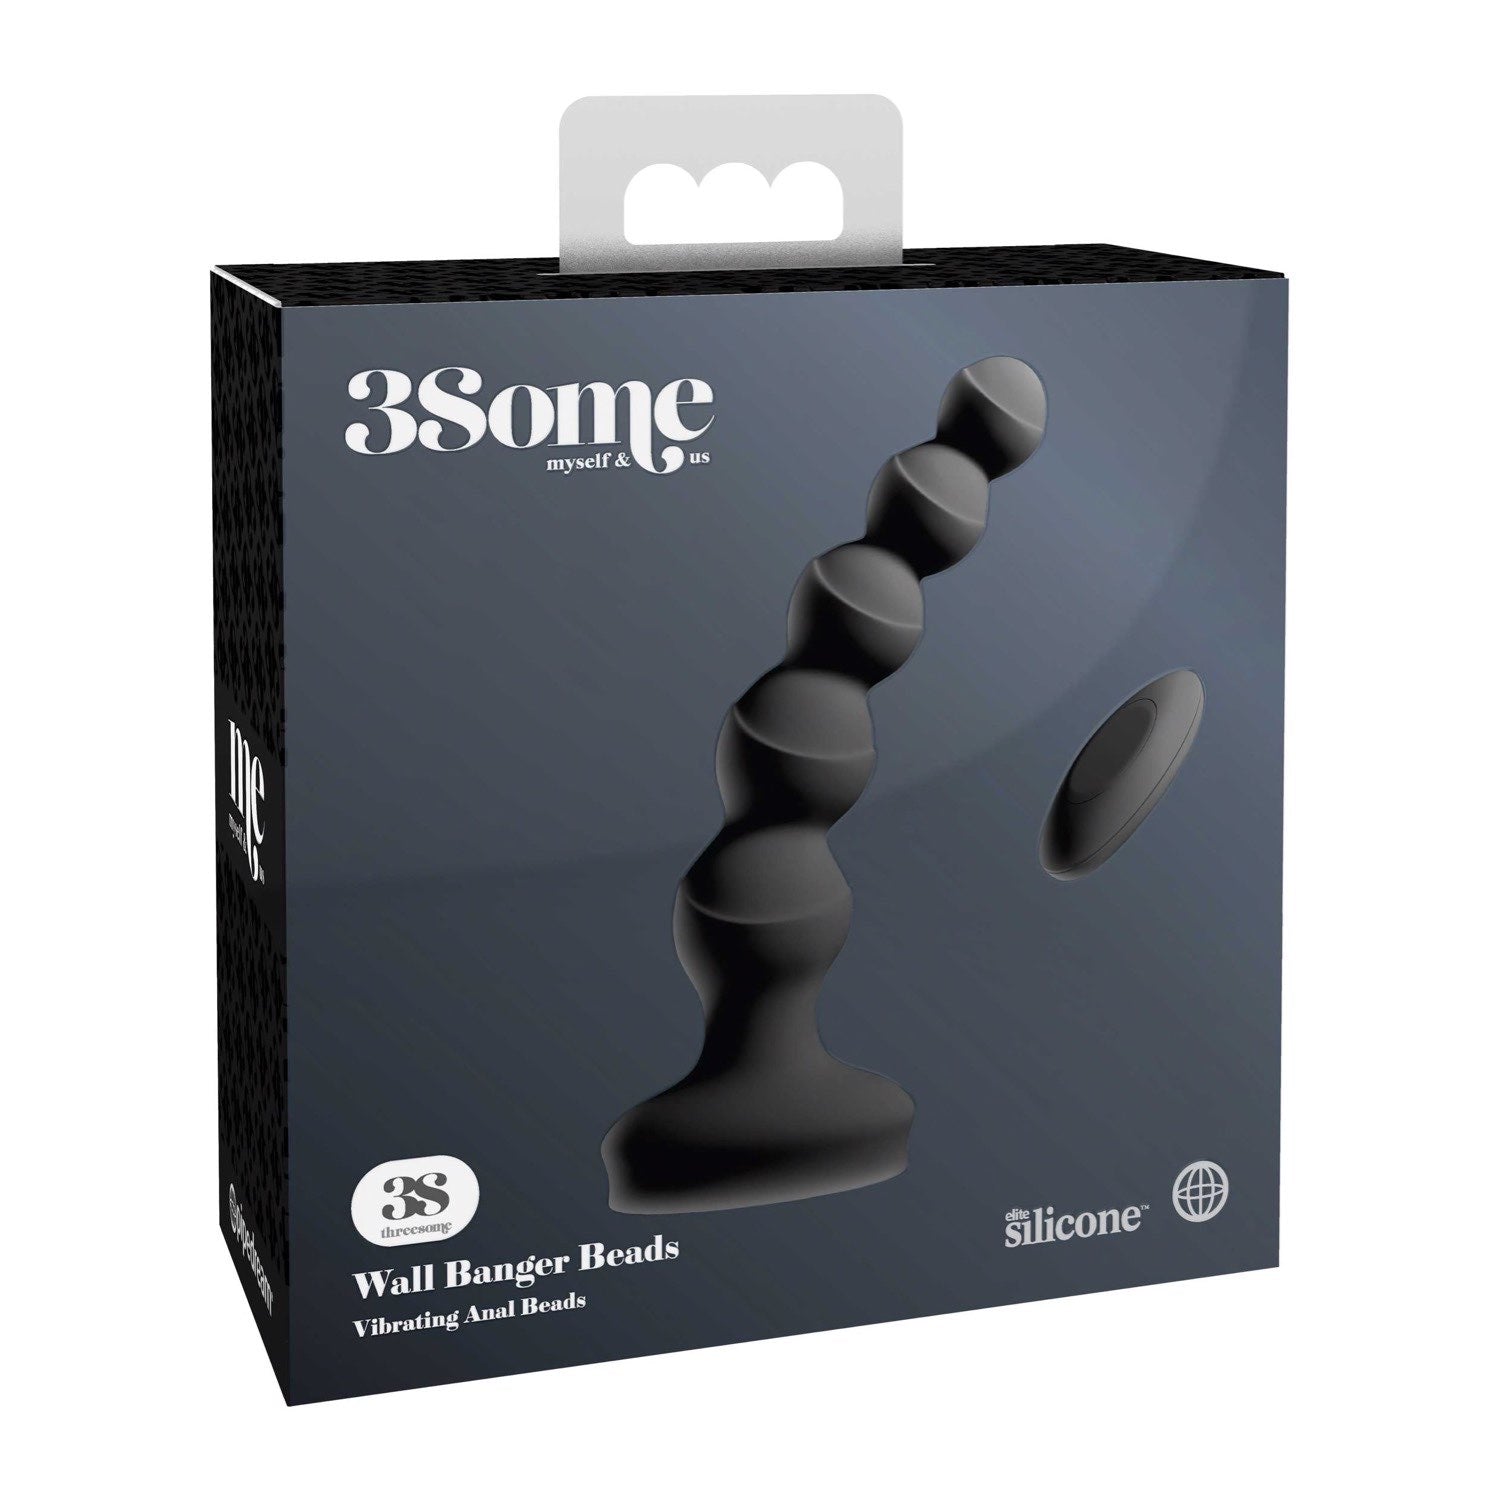 3Some Wall Banger Beads - Black USB Rechargeable Vibrating Anal Beads with Remote Control by Pipedream